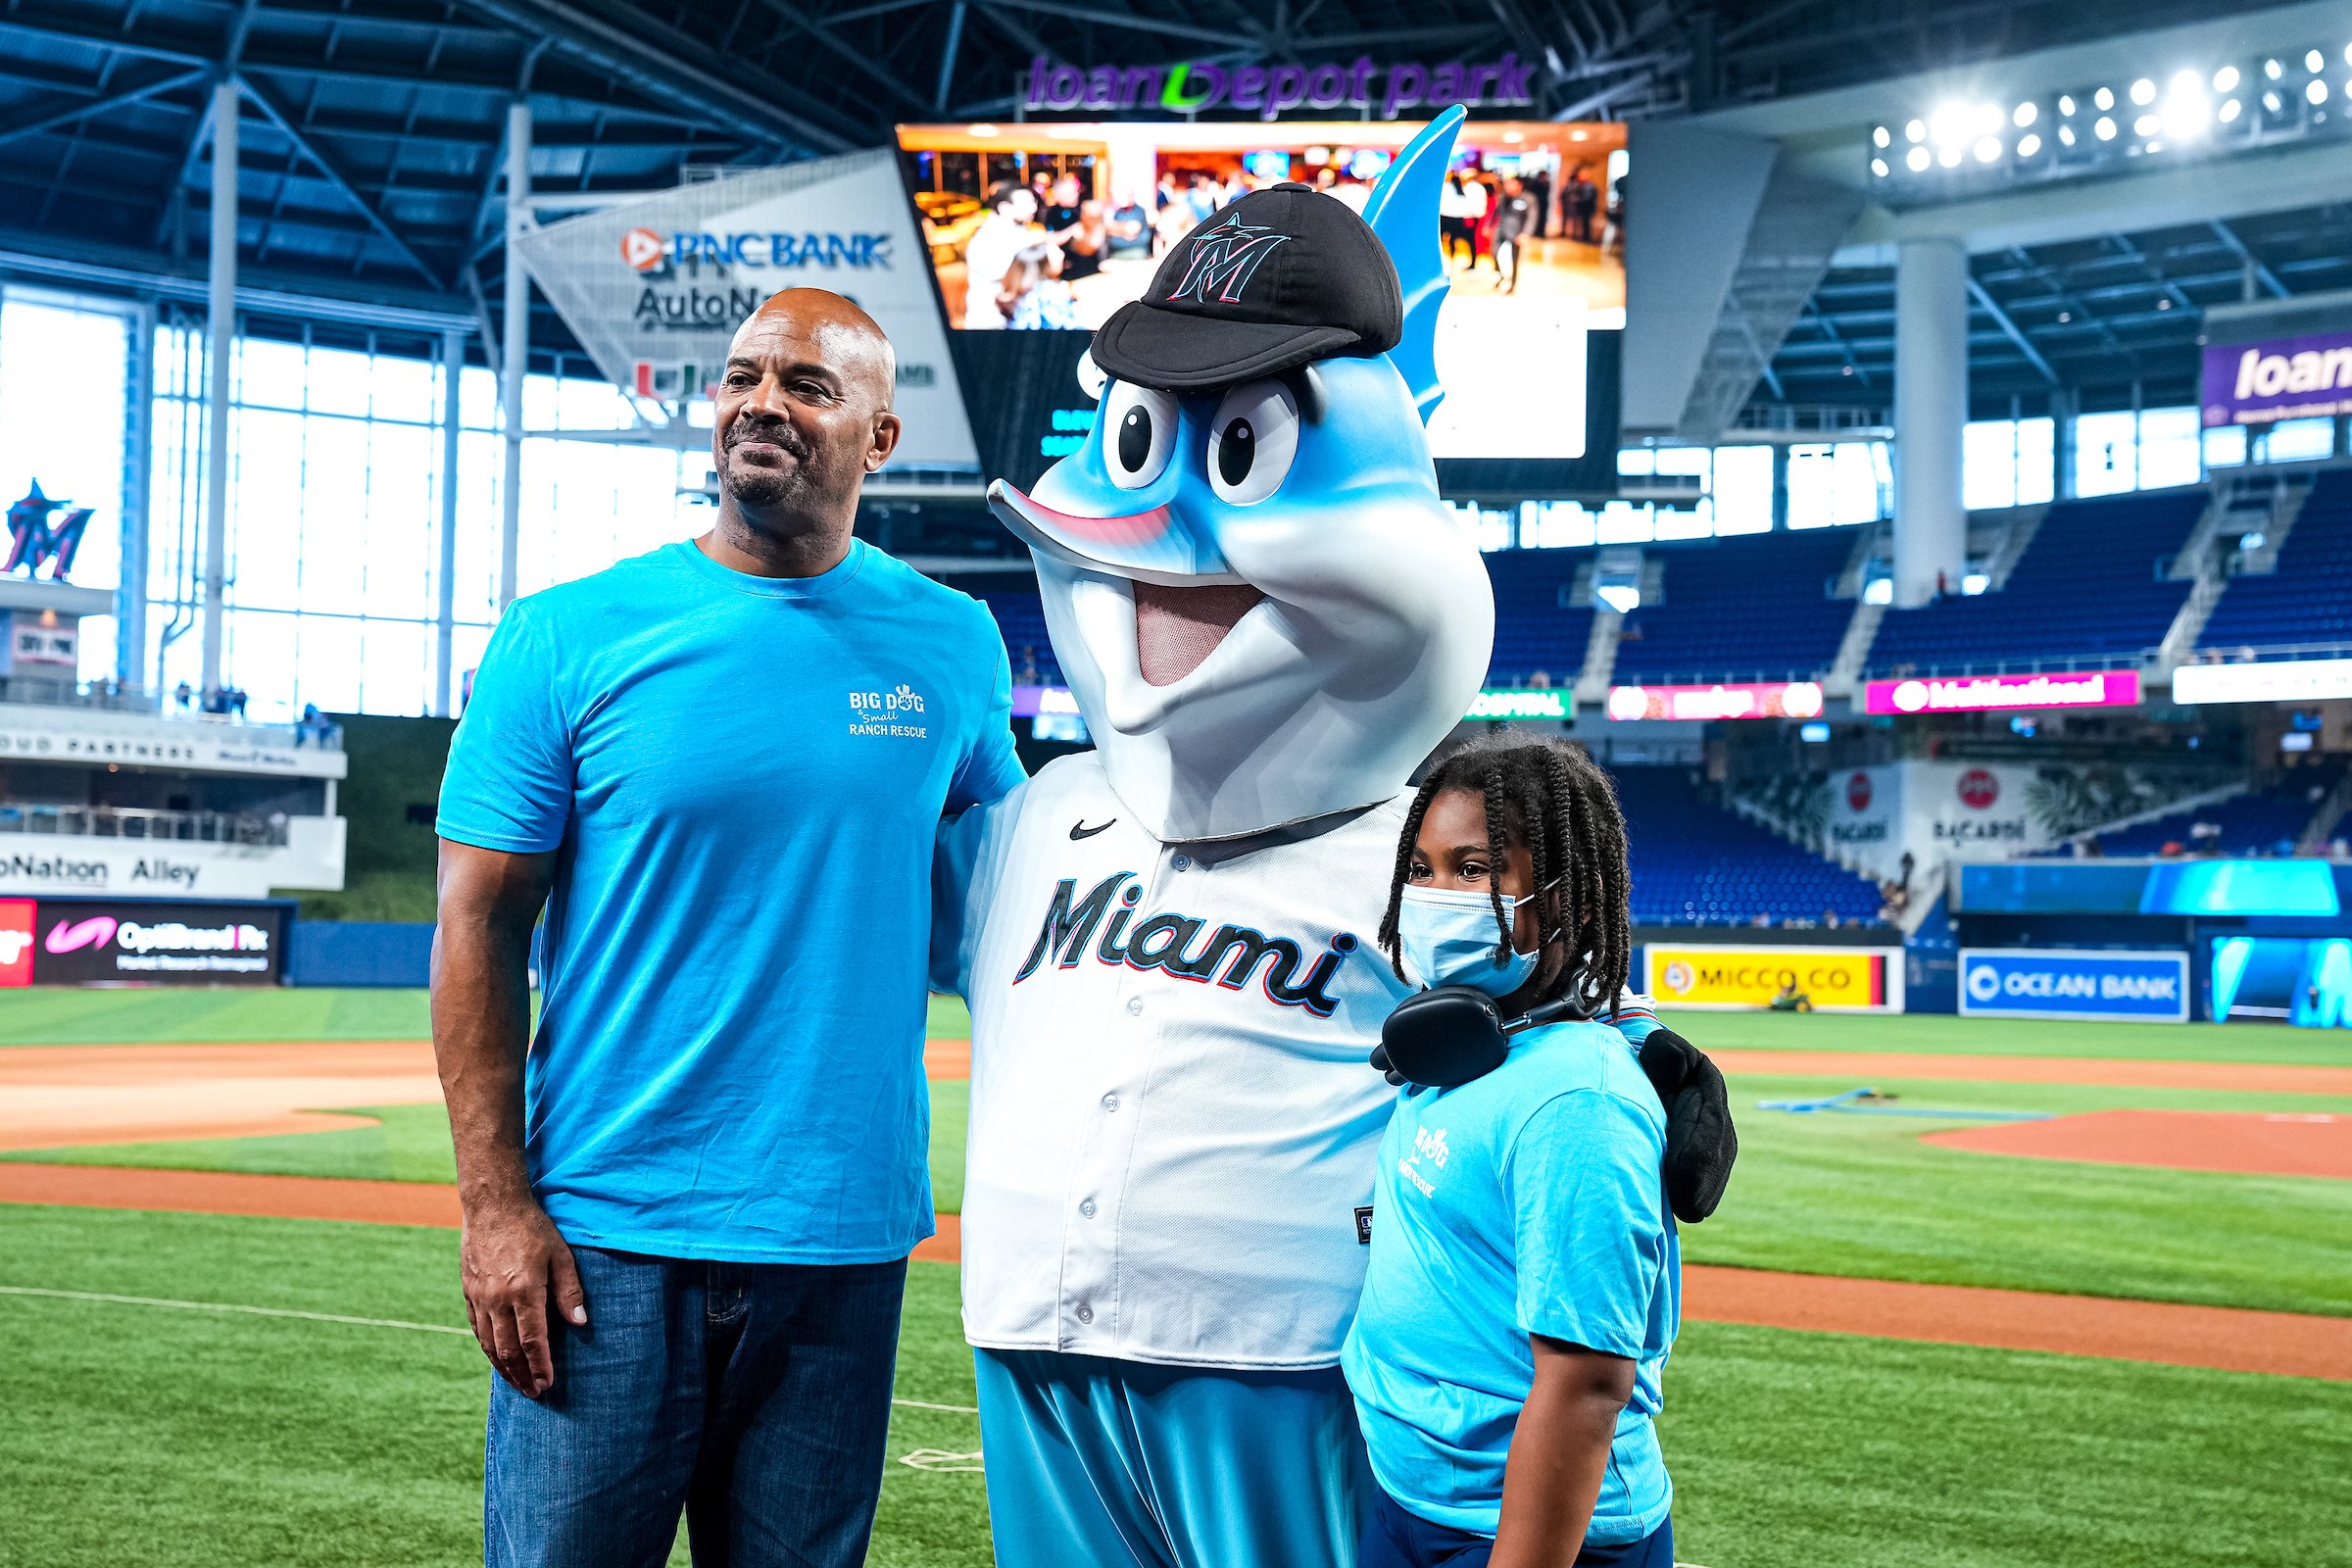  MIAMI, FLORIDA - SEPTEMBER 11: First pitch before a baseball game against the New York Mets on September 11, 2022 at loanDepot park in Miami, Florida. 